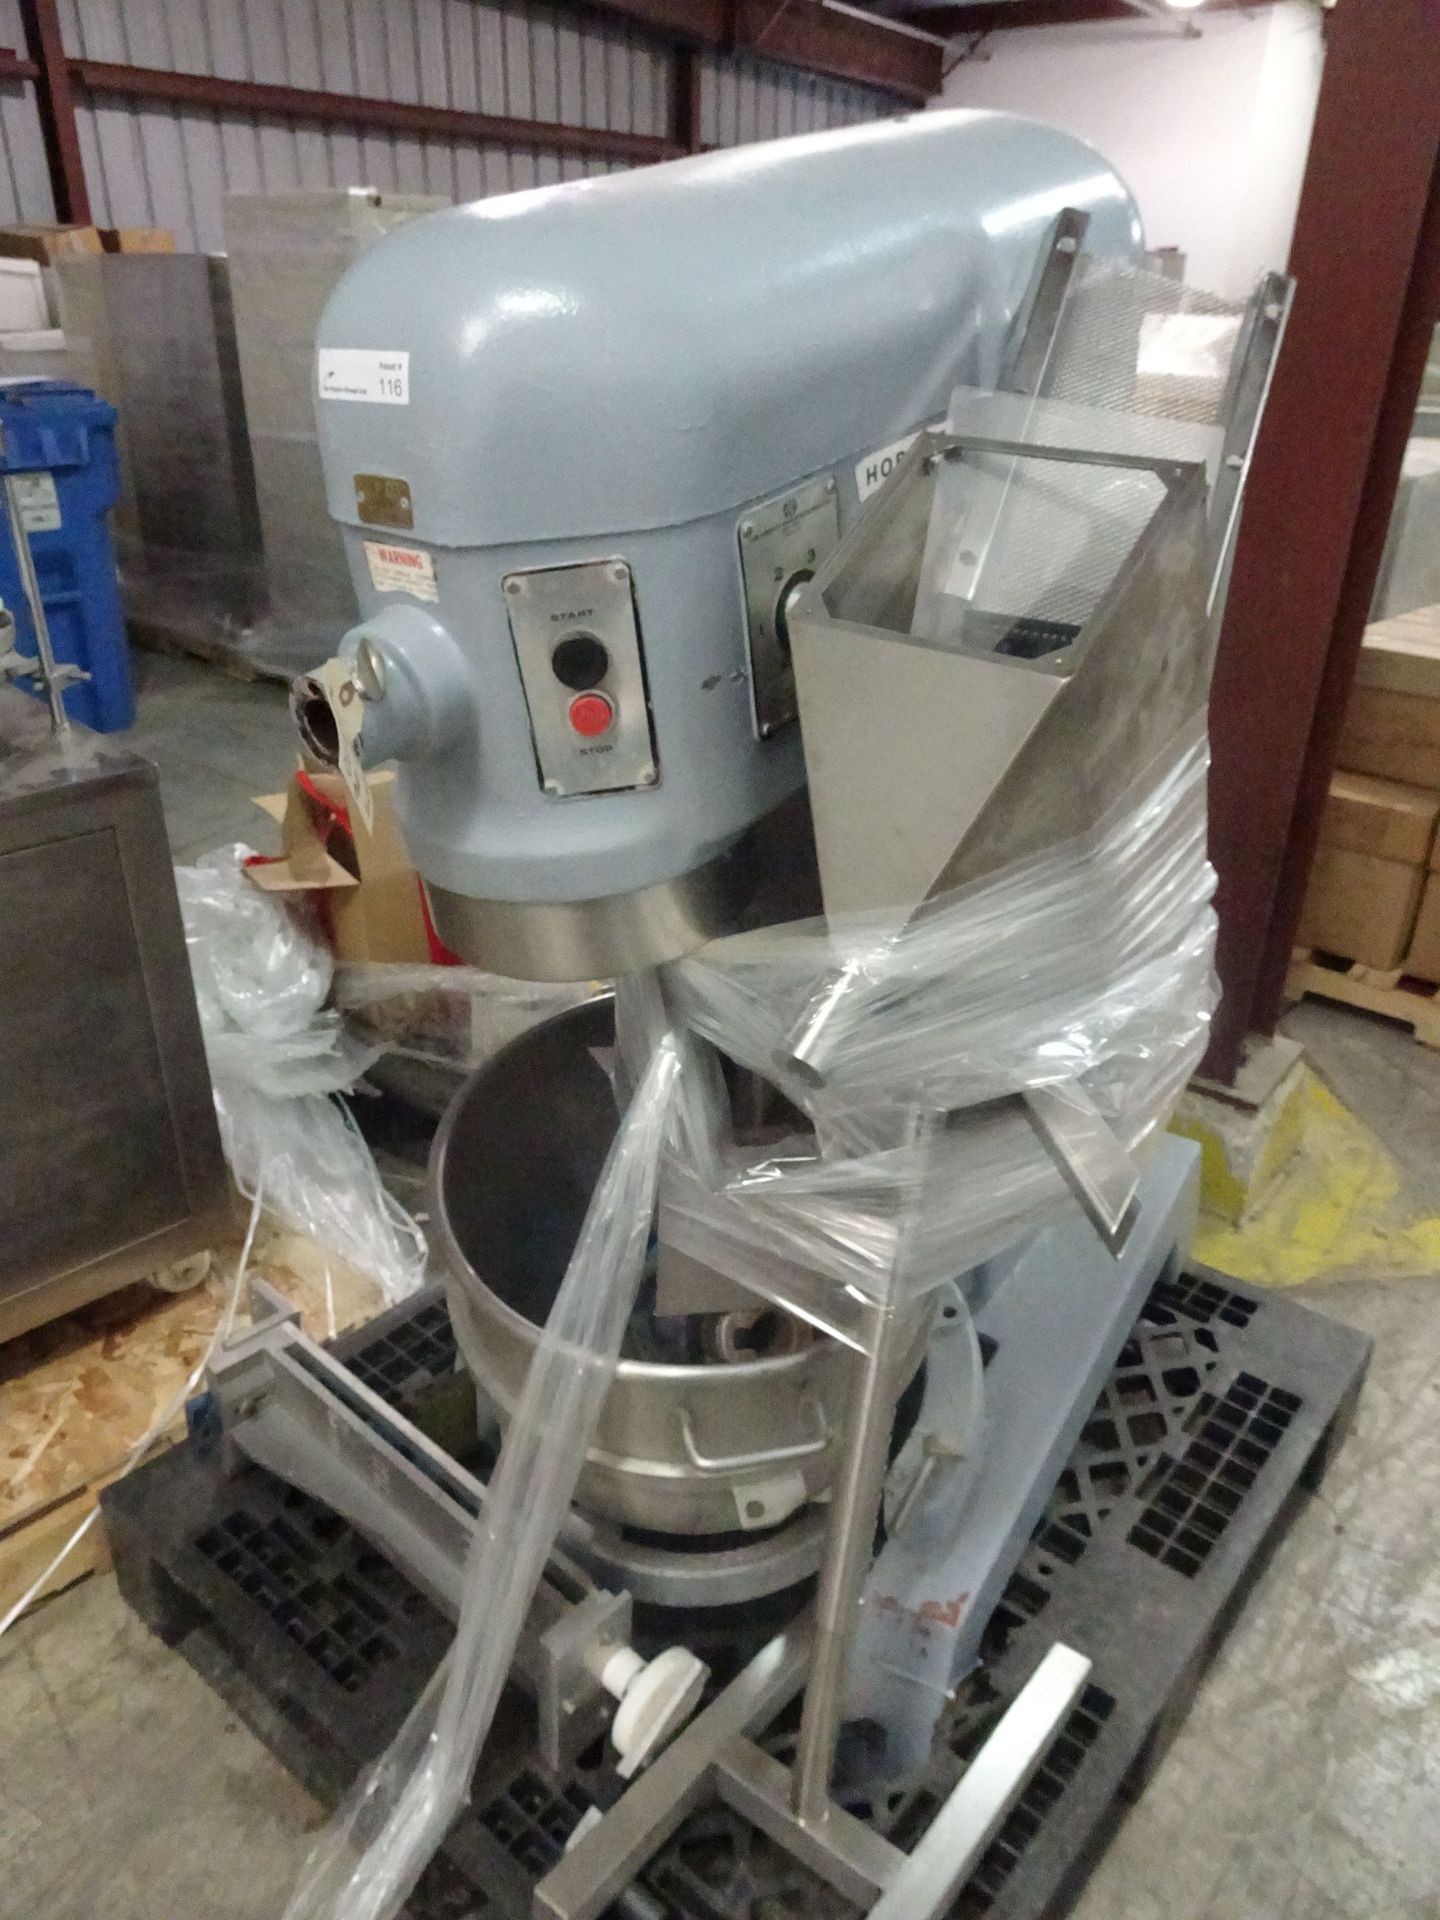 Hobart Model H-600 2HP Planetary Mixer With Bowl, Whisk, And Accessories - Image 2 of 4